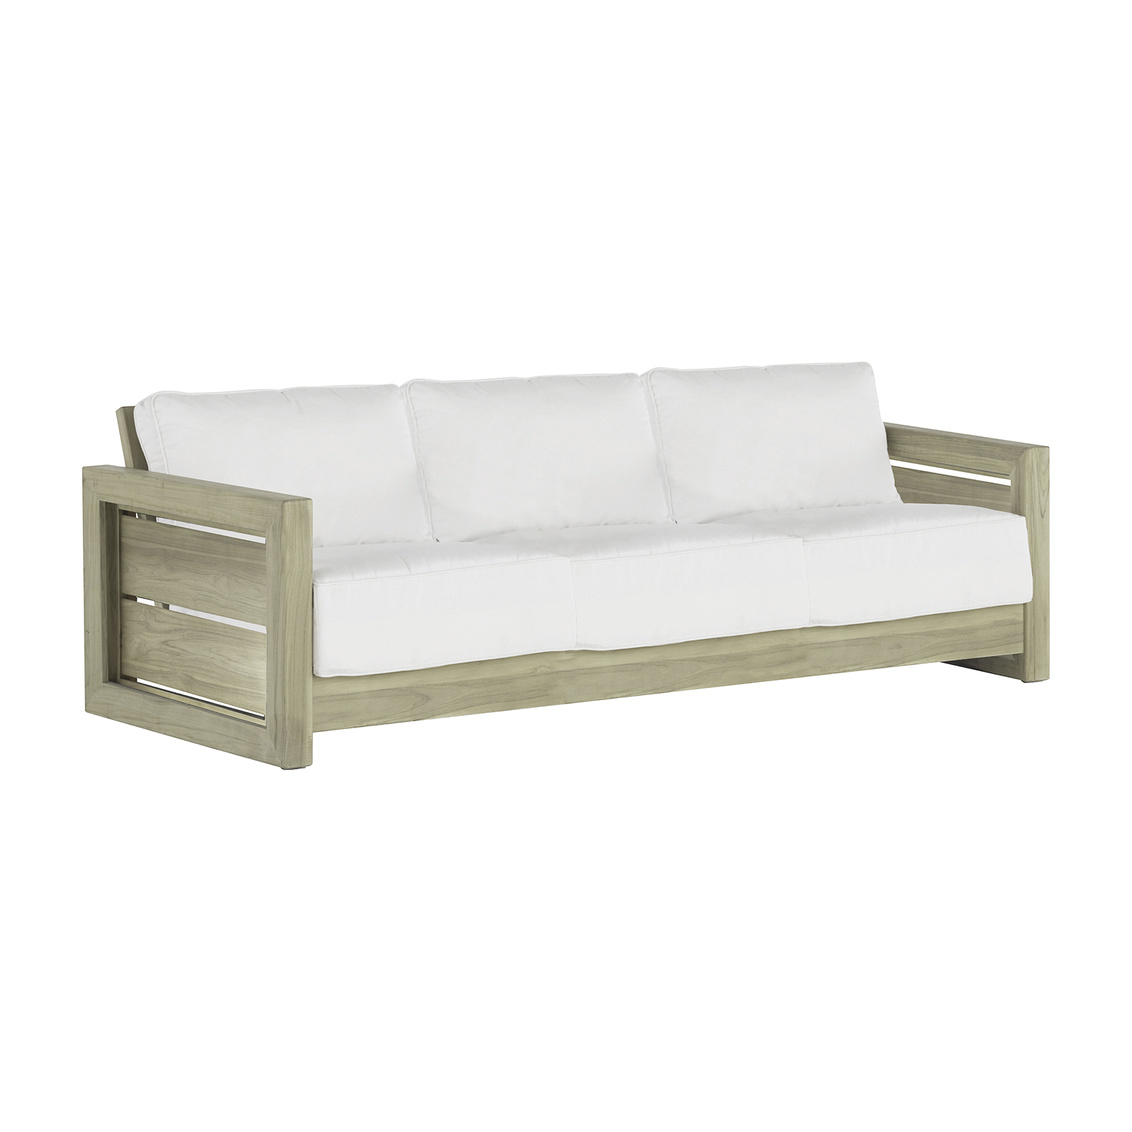 bali sofa in oyster teak – frame only product image